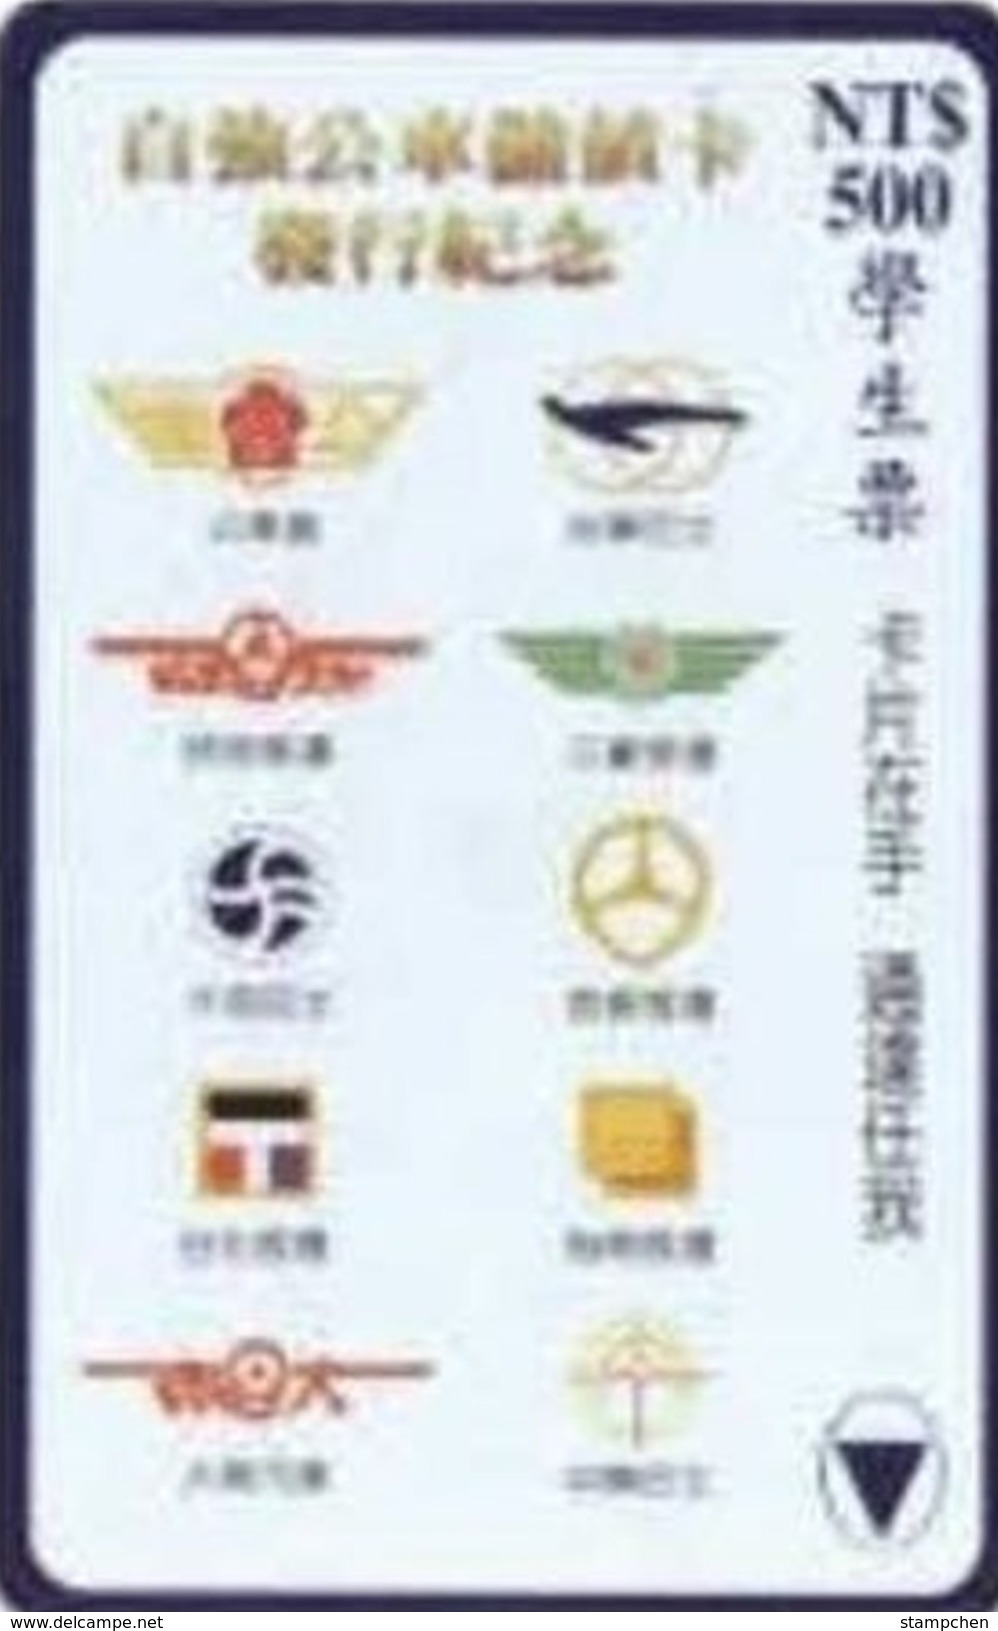 Taiwan Early Bus Ticket Emblem (S0001) - Cars